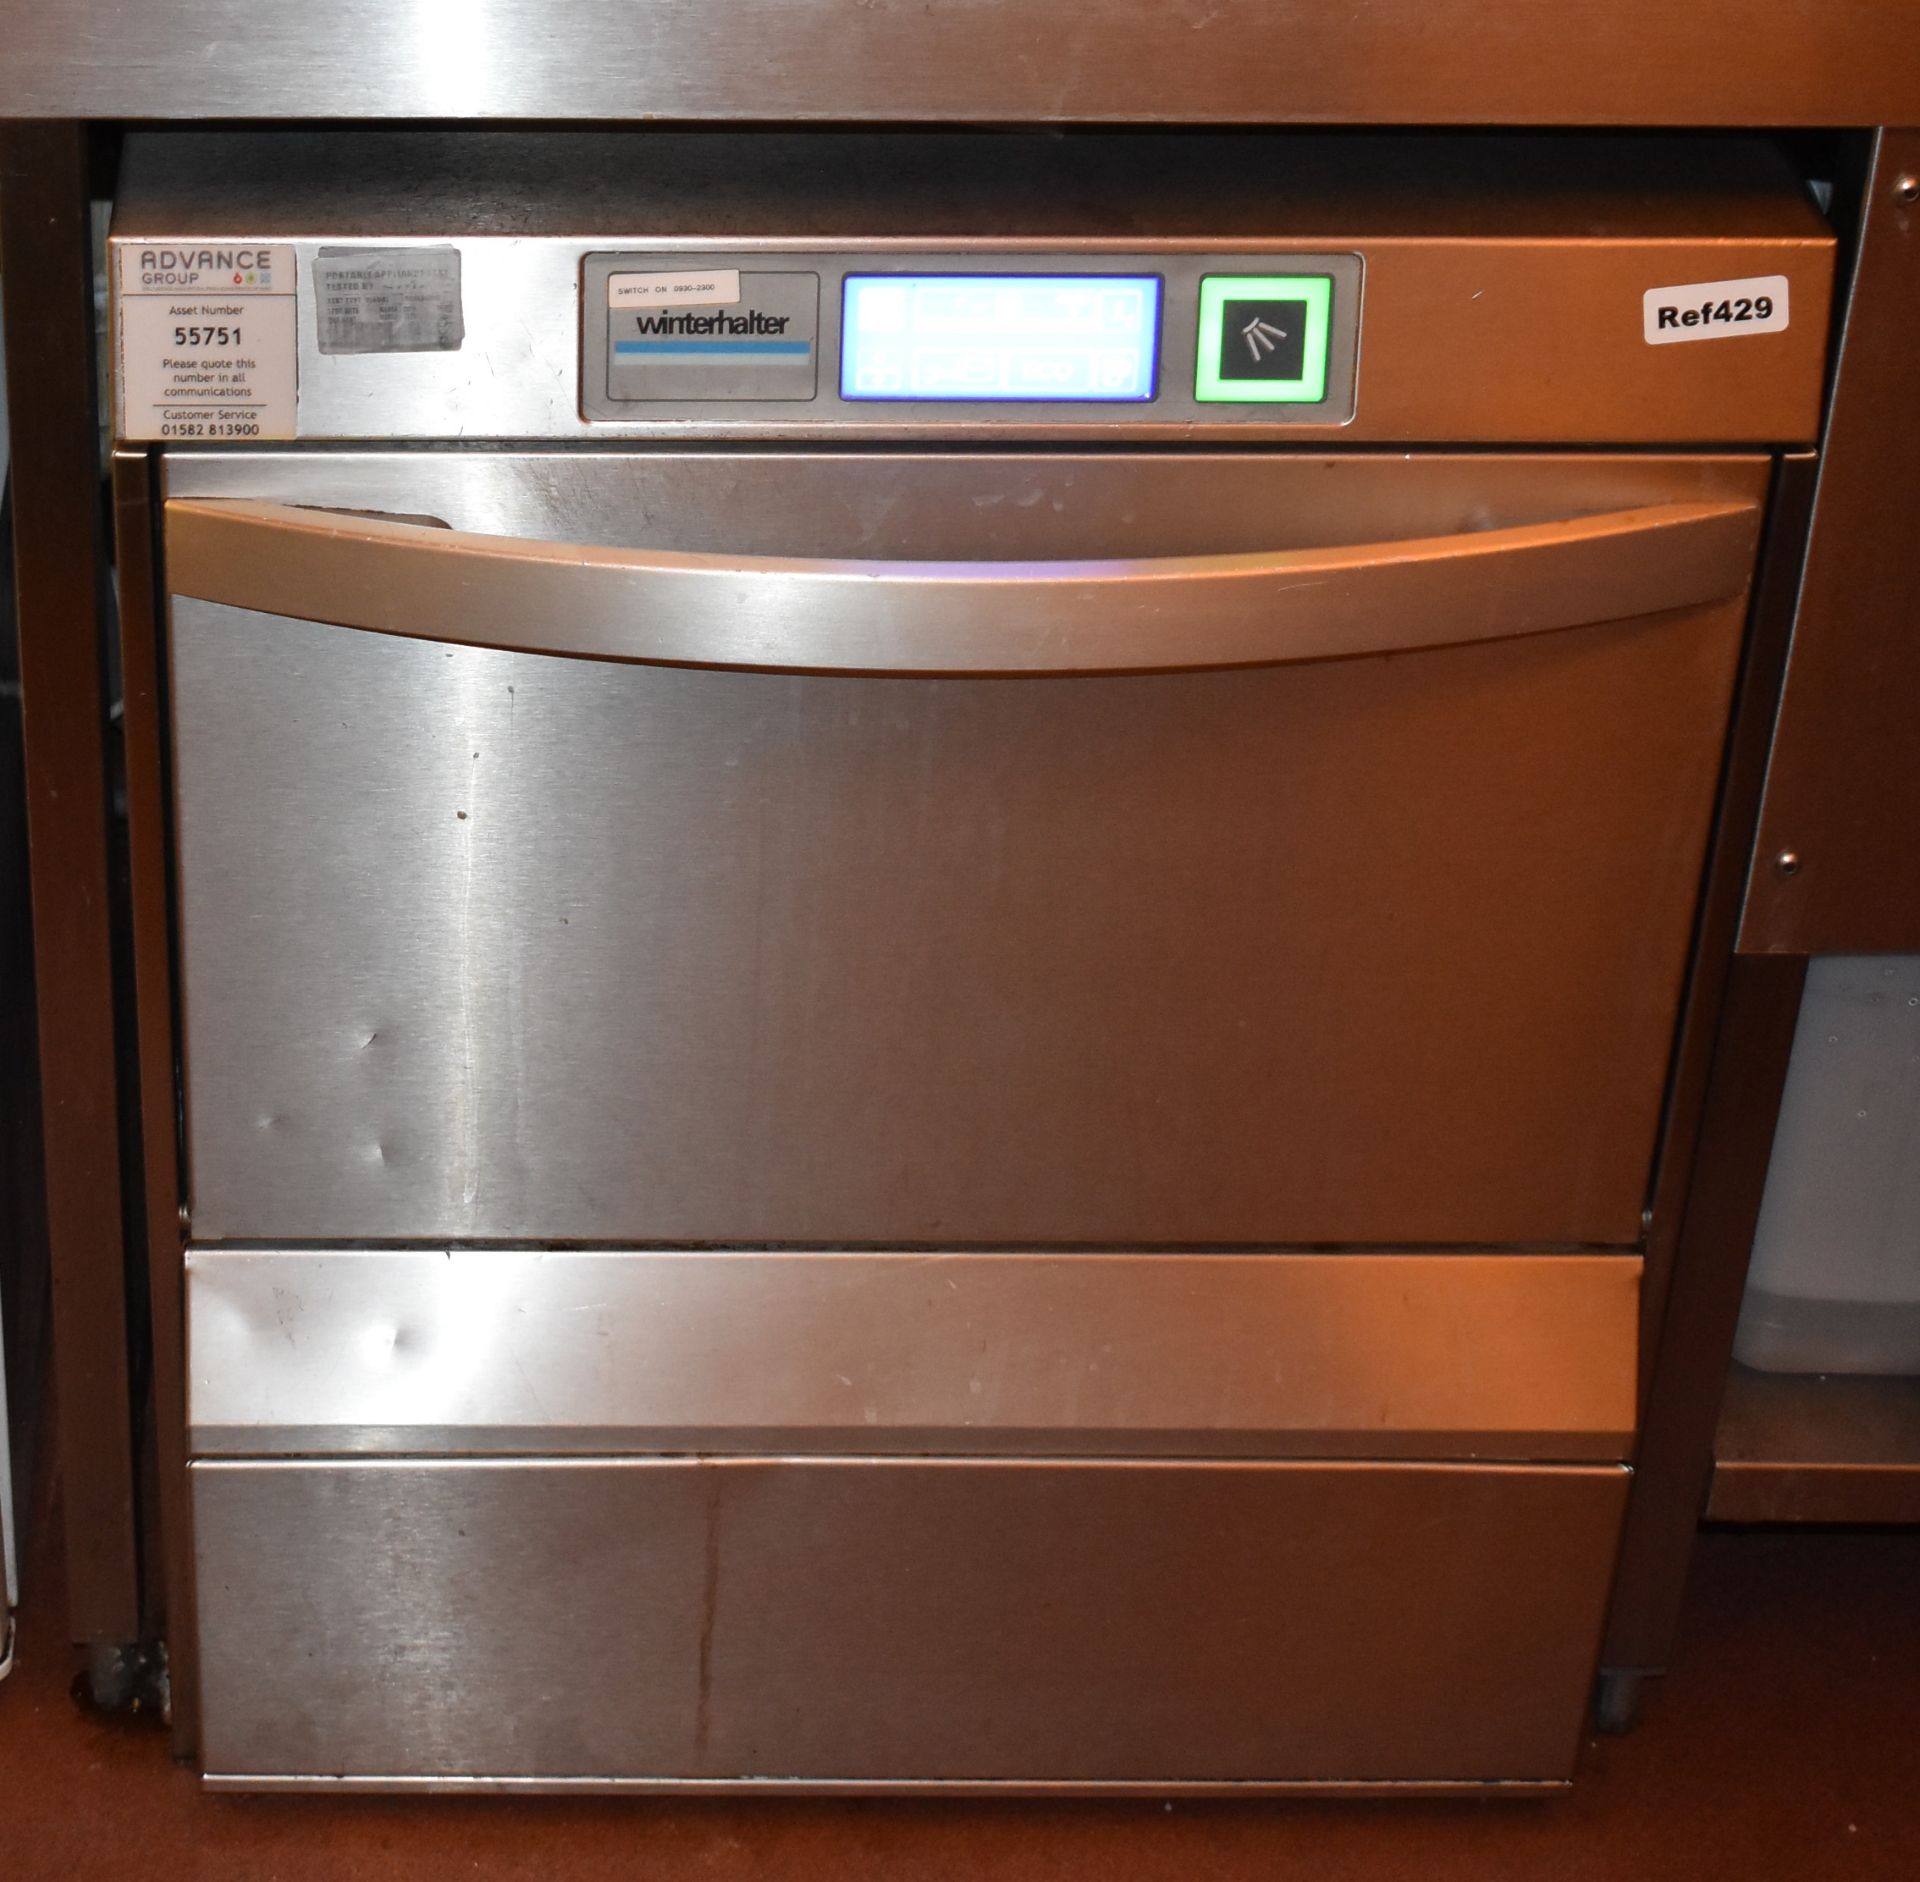 1 x Winterhalter UC-M Commercial Backbar Glass Washer With Stainless Steel Finish - H75 x W60 x